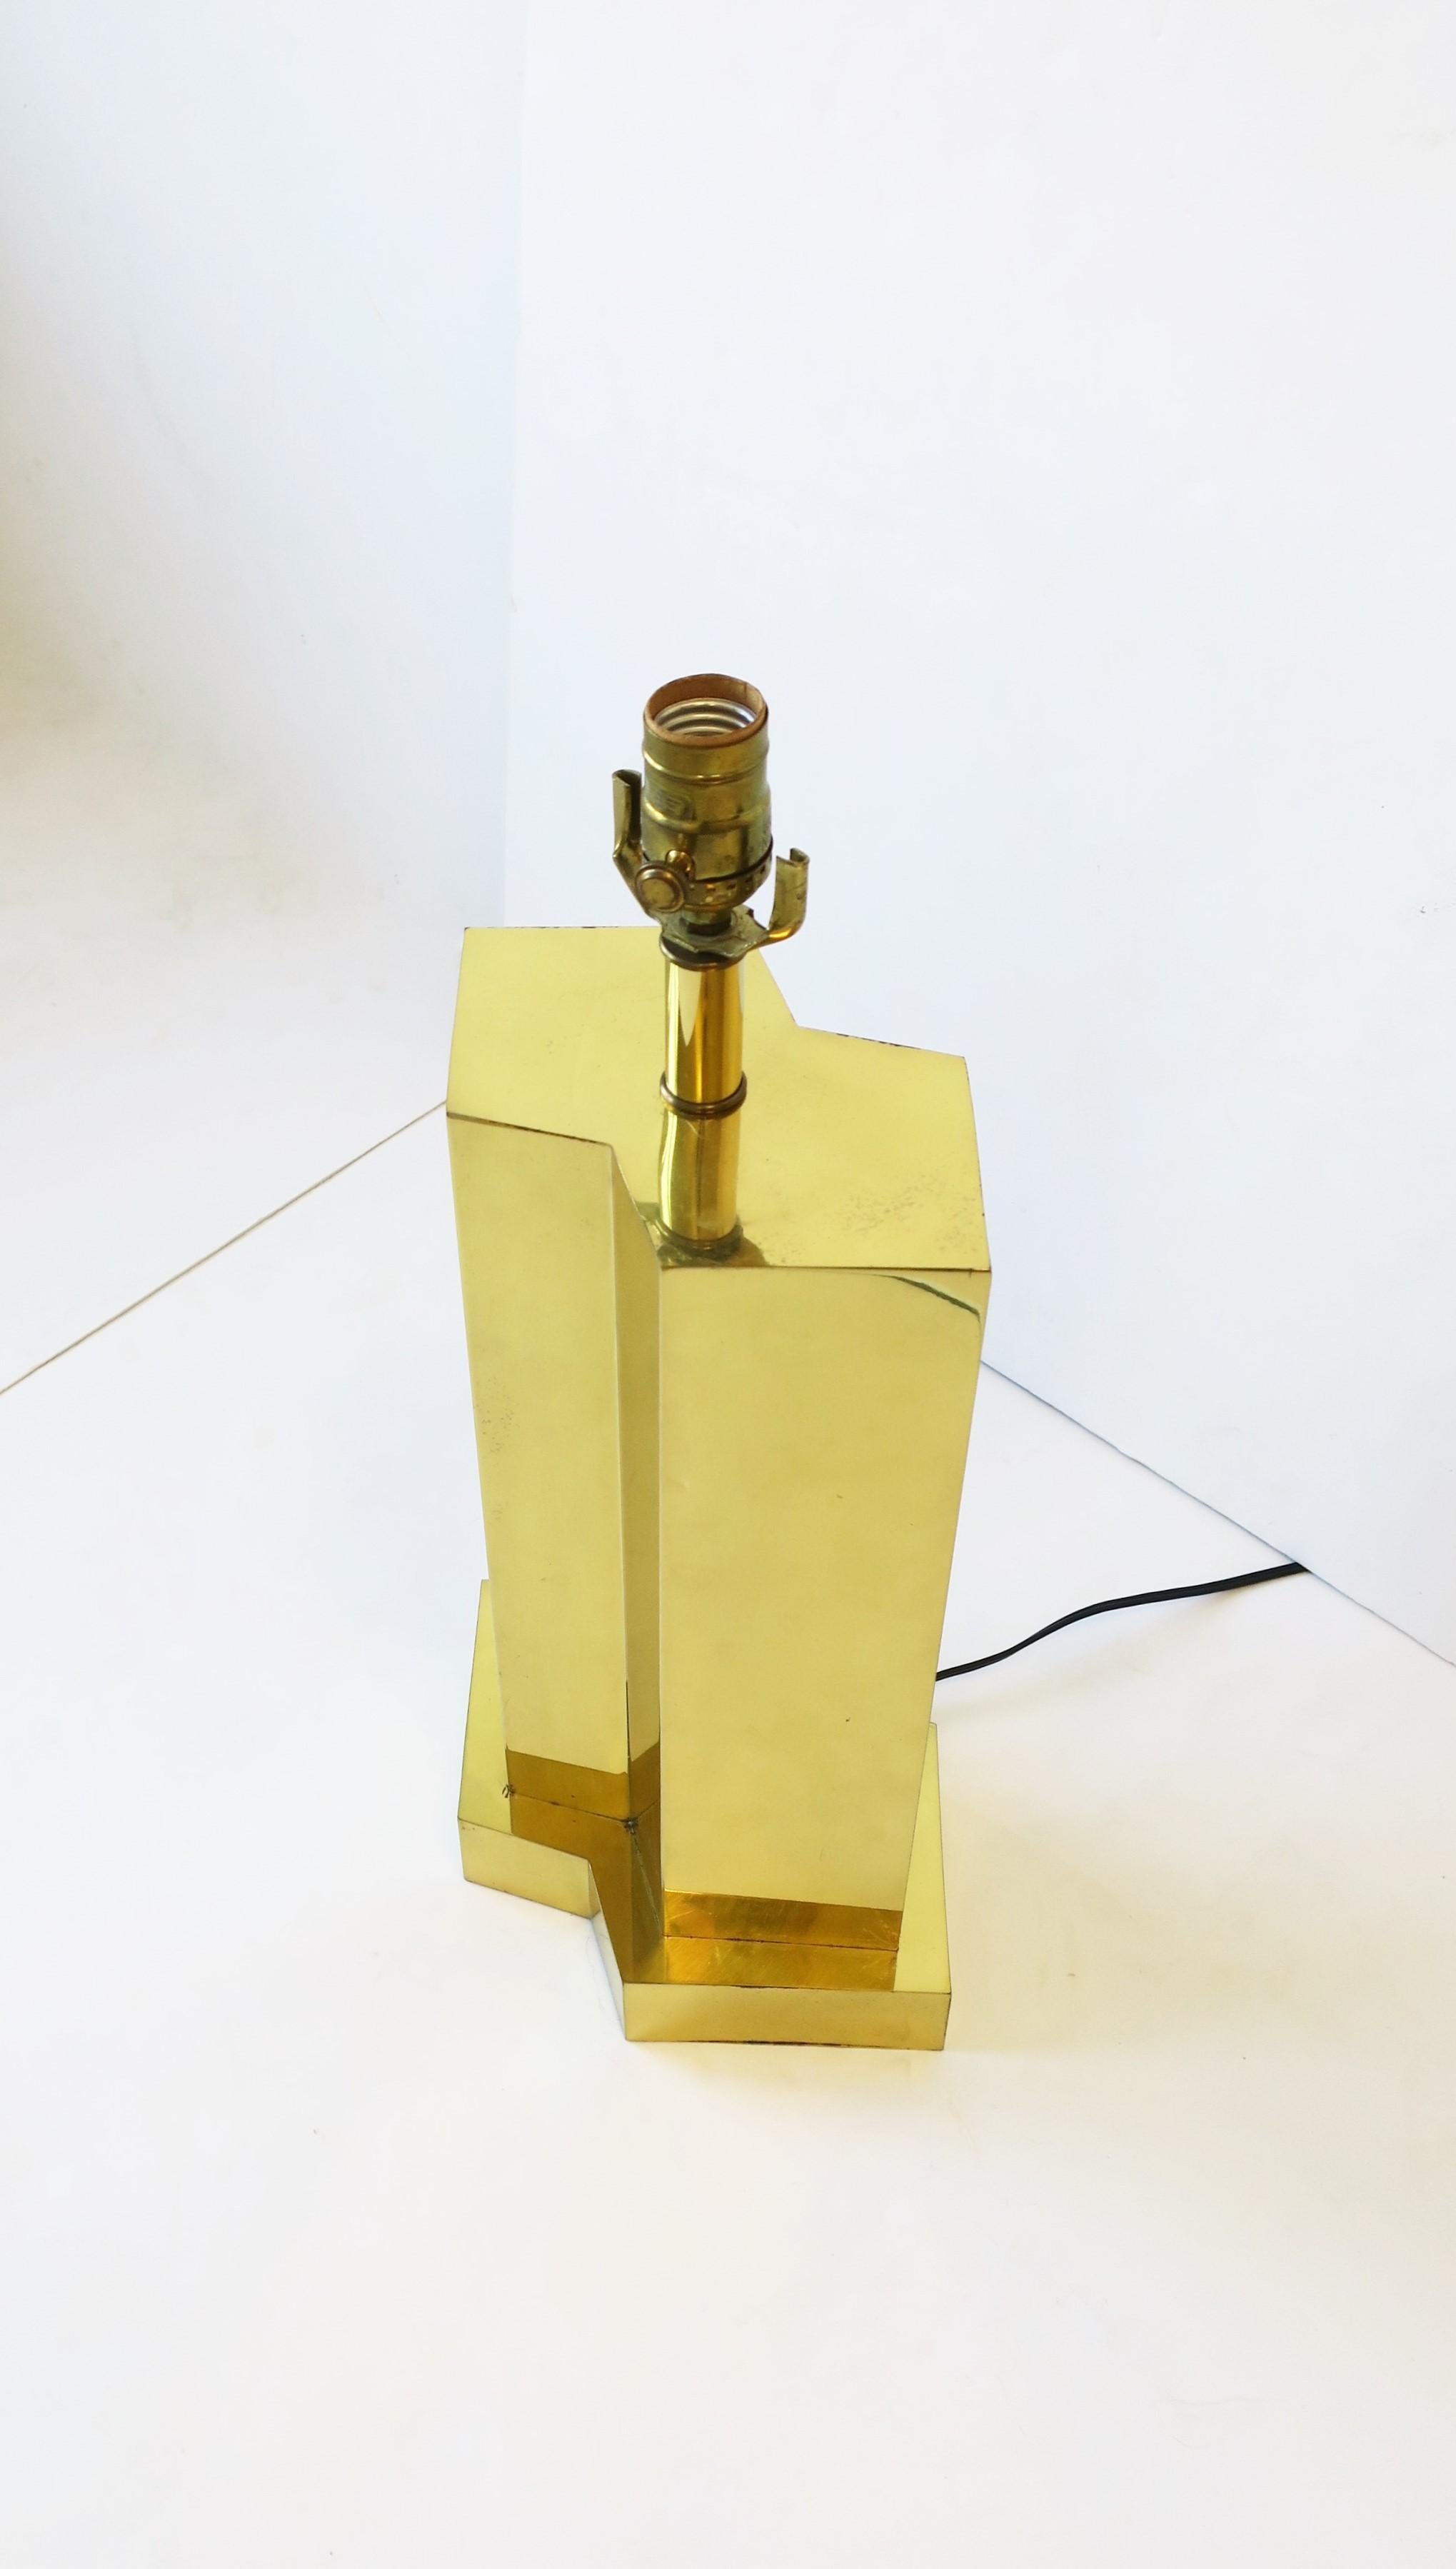 Plated '70s Modern Postmodern Brass Desk or Table Lamp, circa 1970s For Sale